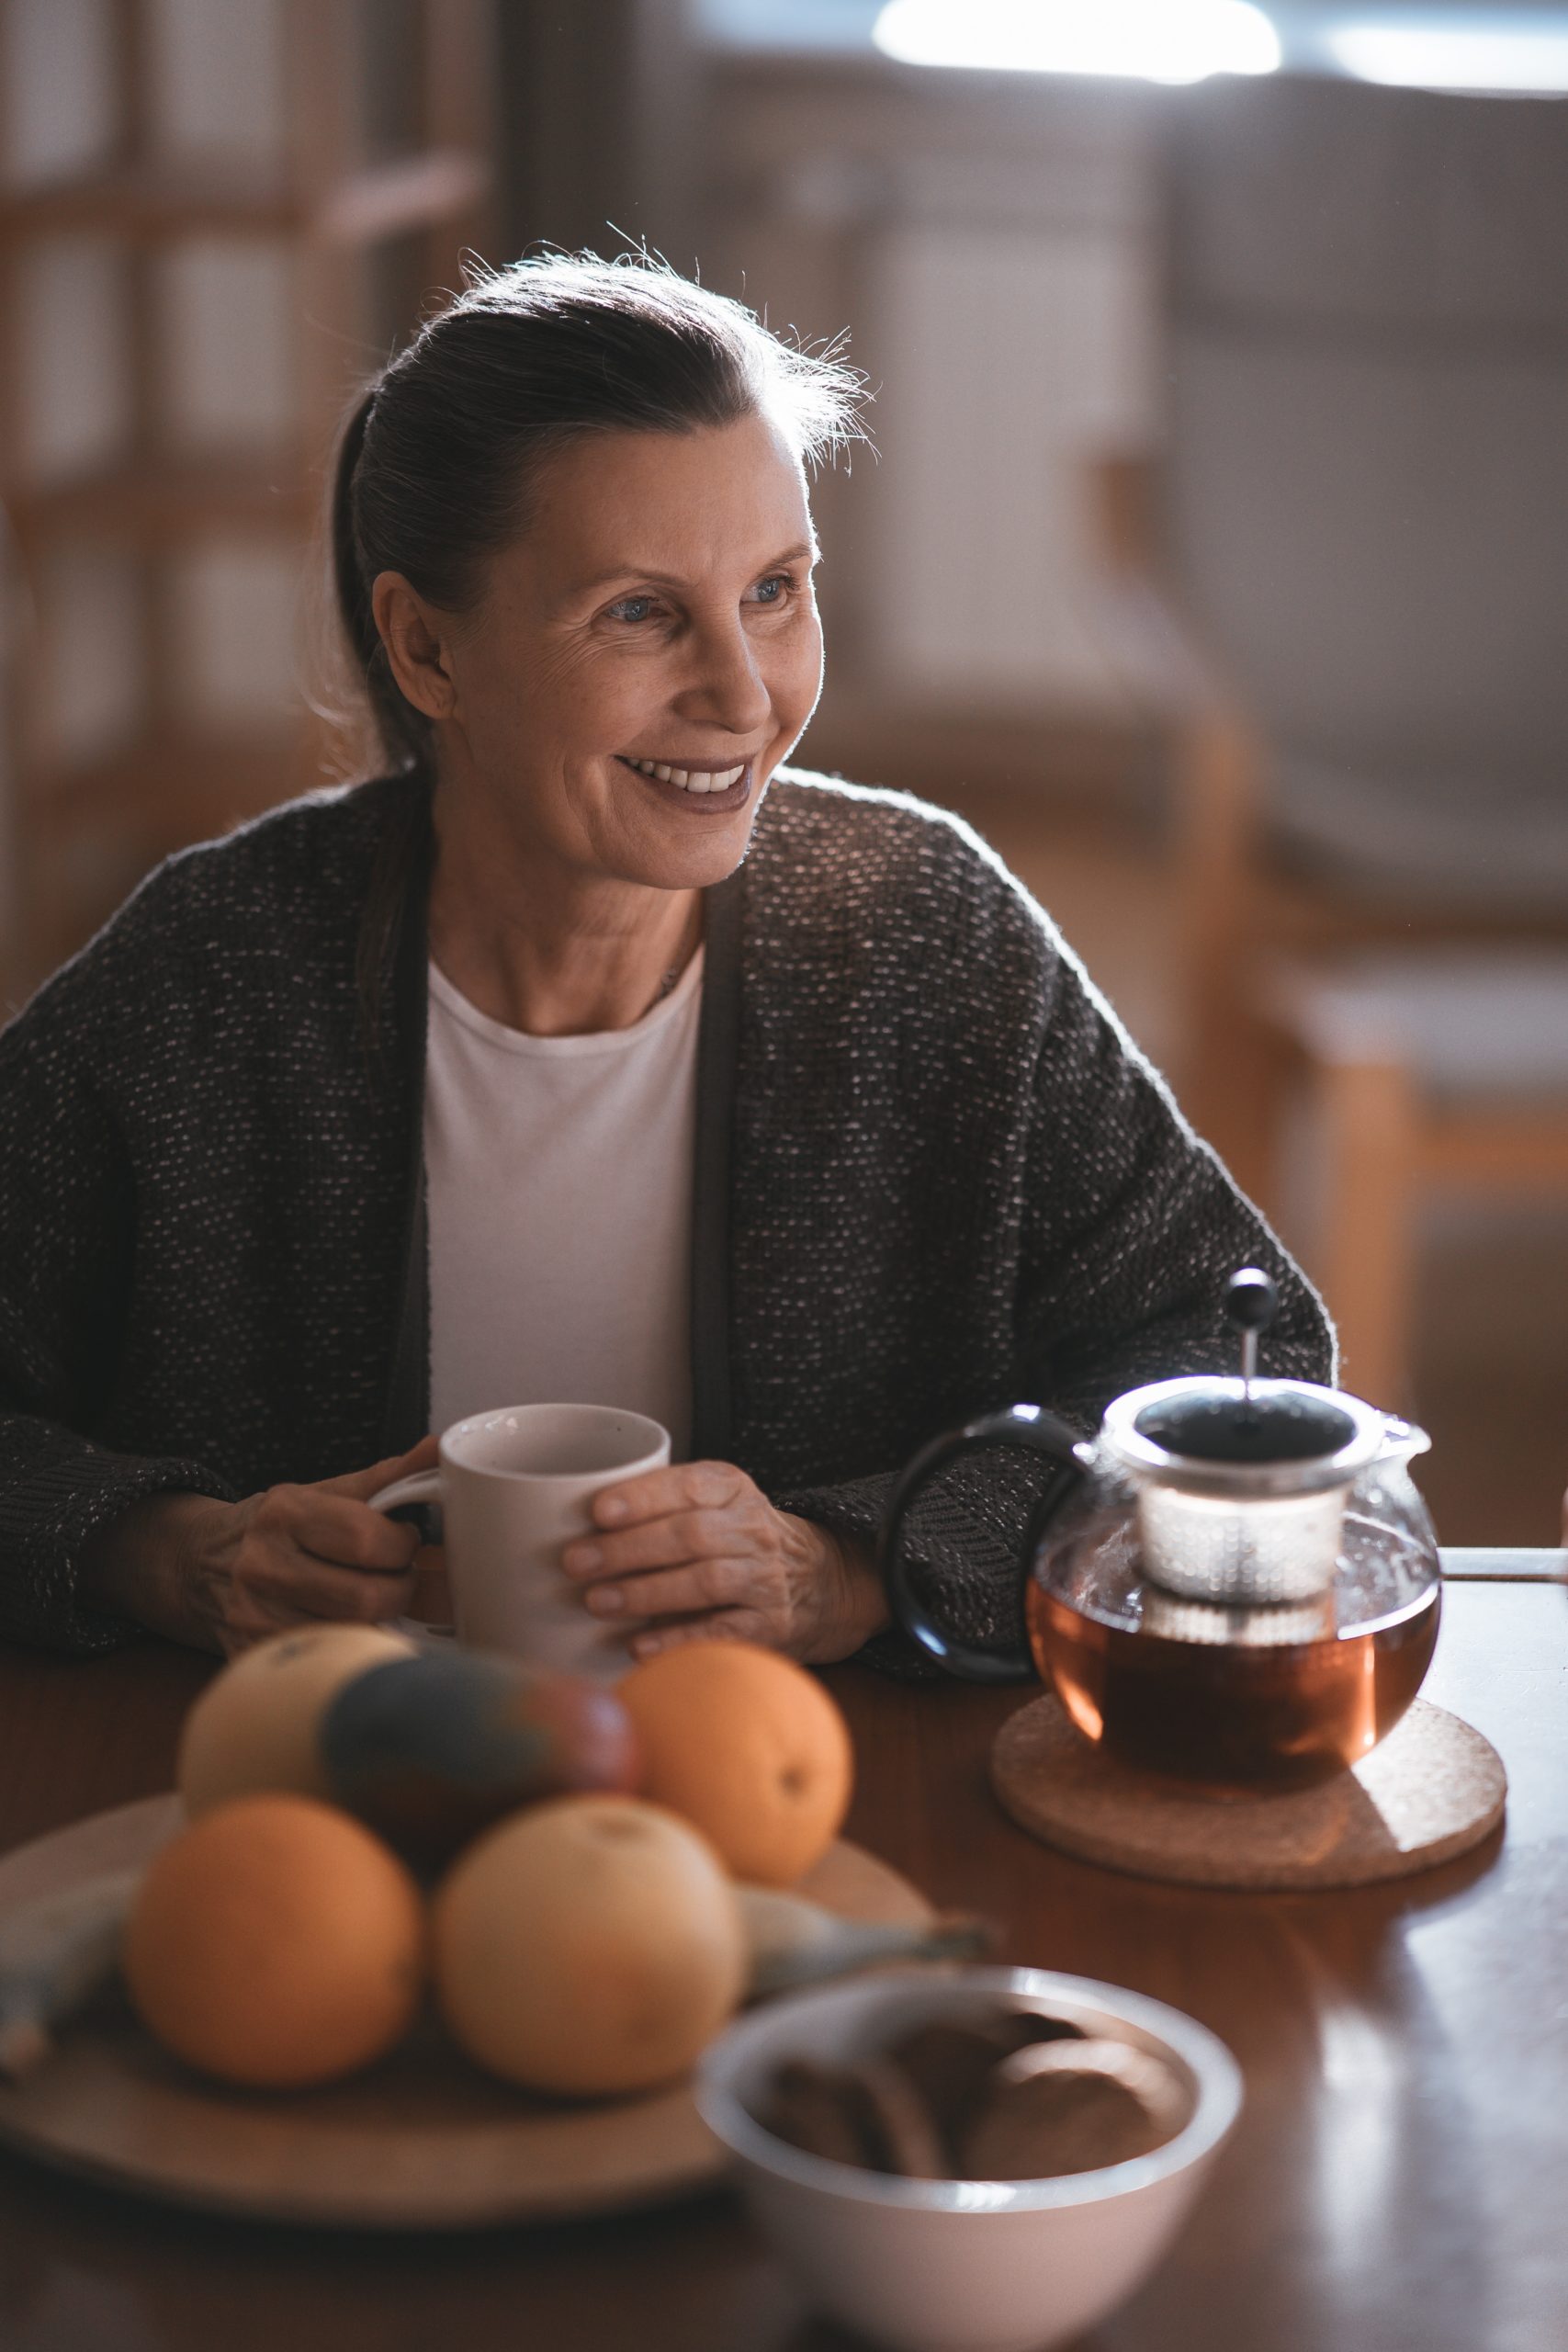 middle-aged woman sitting at a kitchen table drinking hot tea smiling